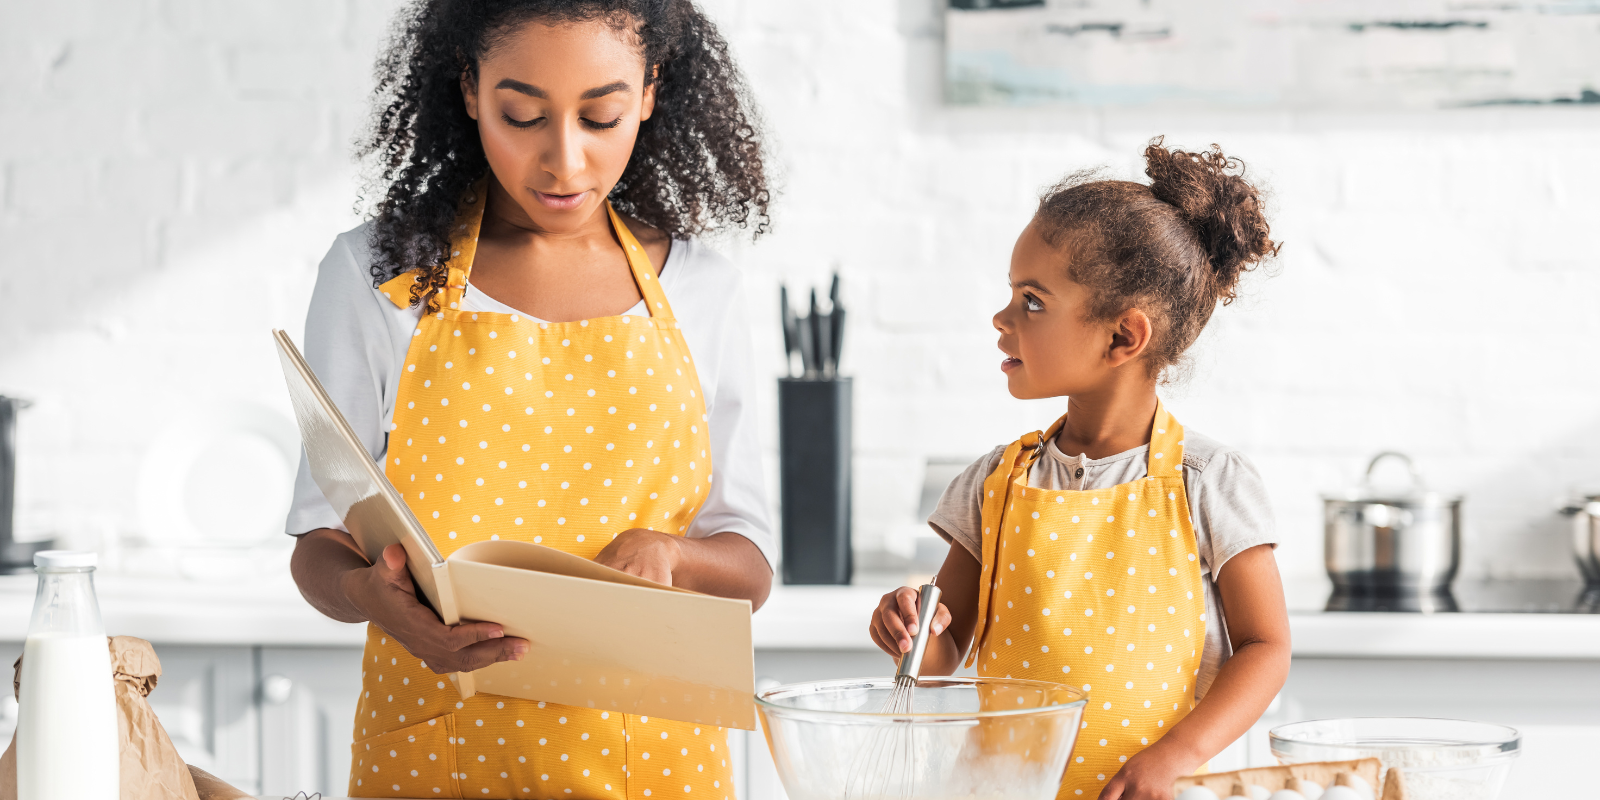 A young Black teenage girl with curly brown hair holding a cookbook and a small Black toddler with curly brown hair tied up both wearing yellow polka-dotted aprons stand at a kitchen counter covered with cooking tools.